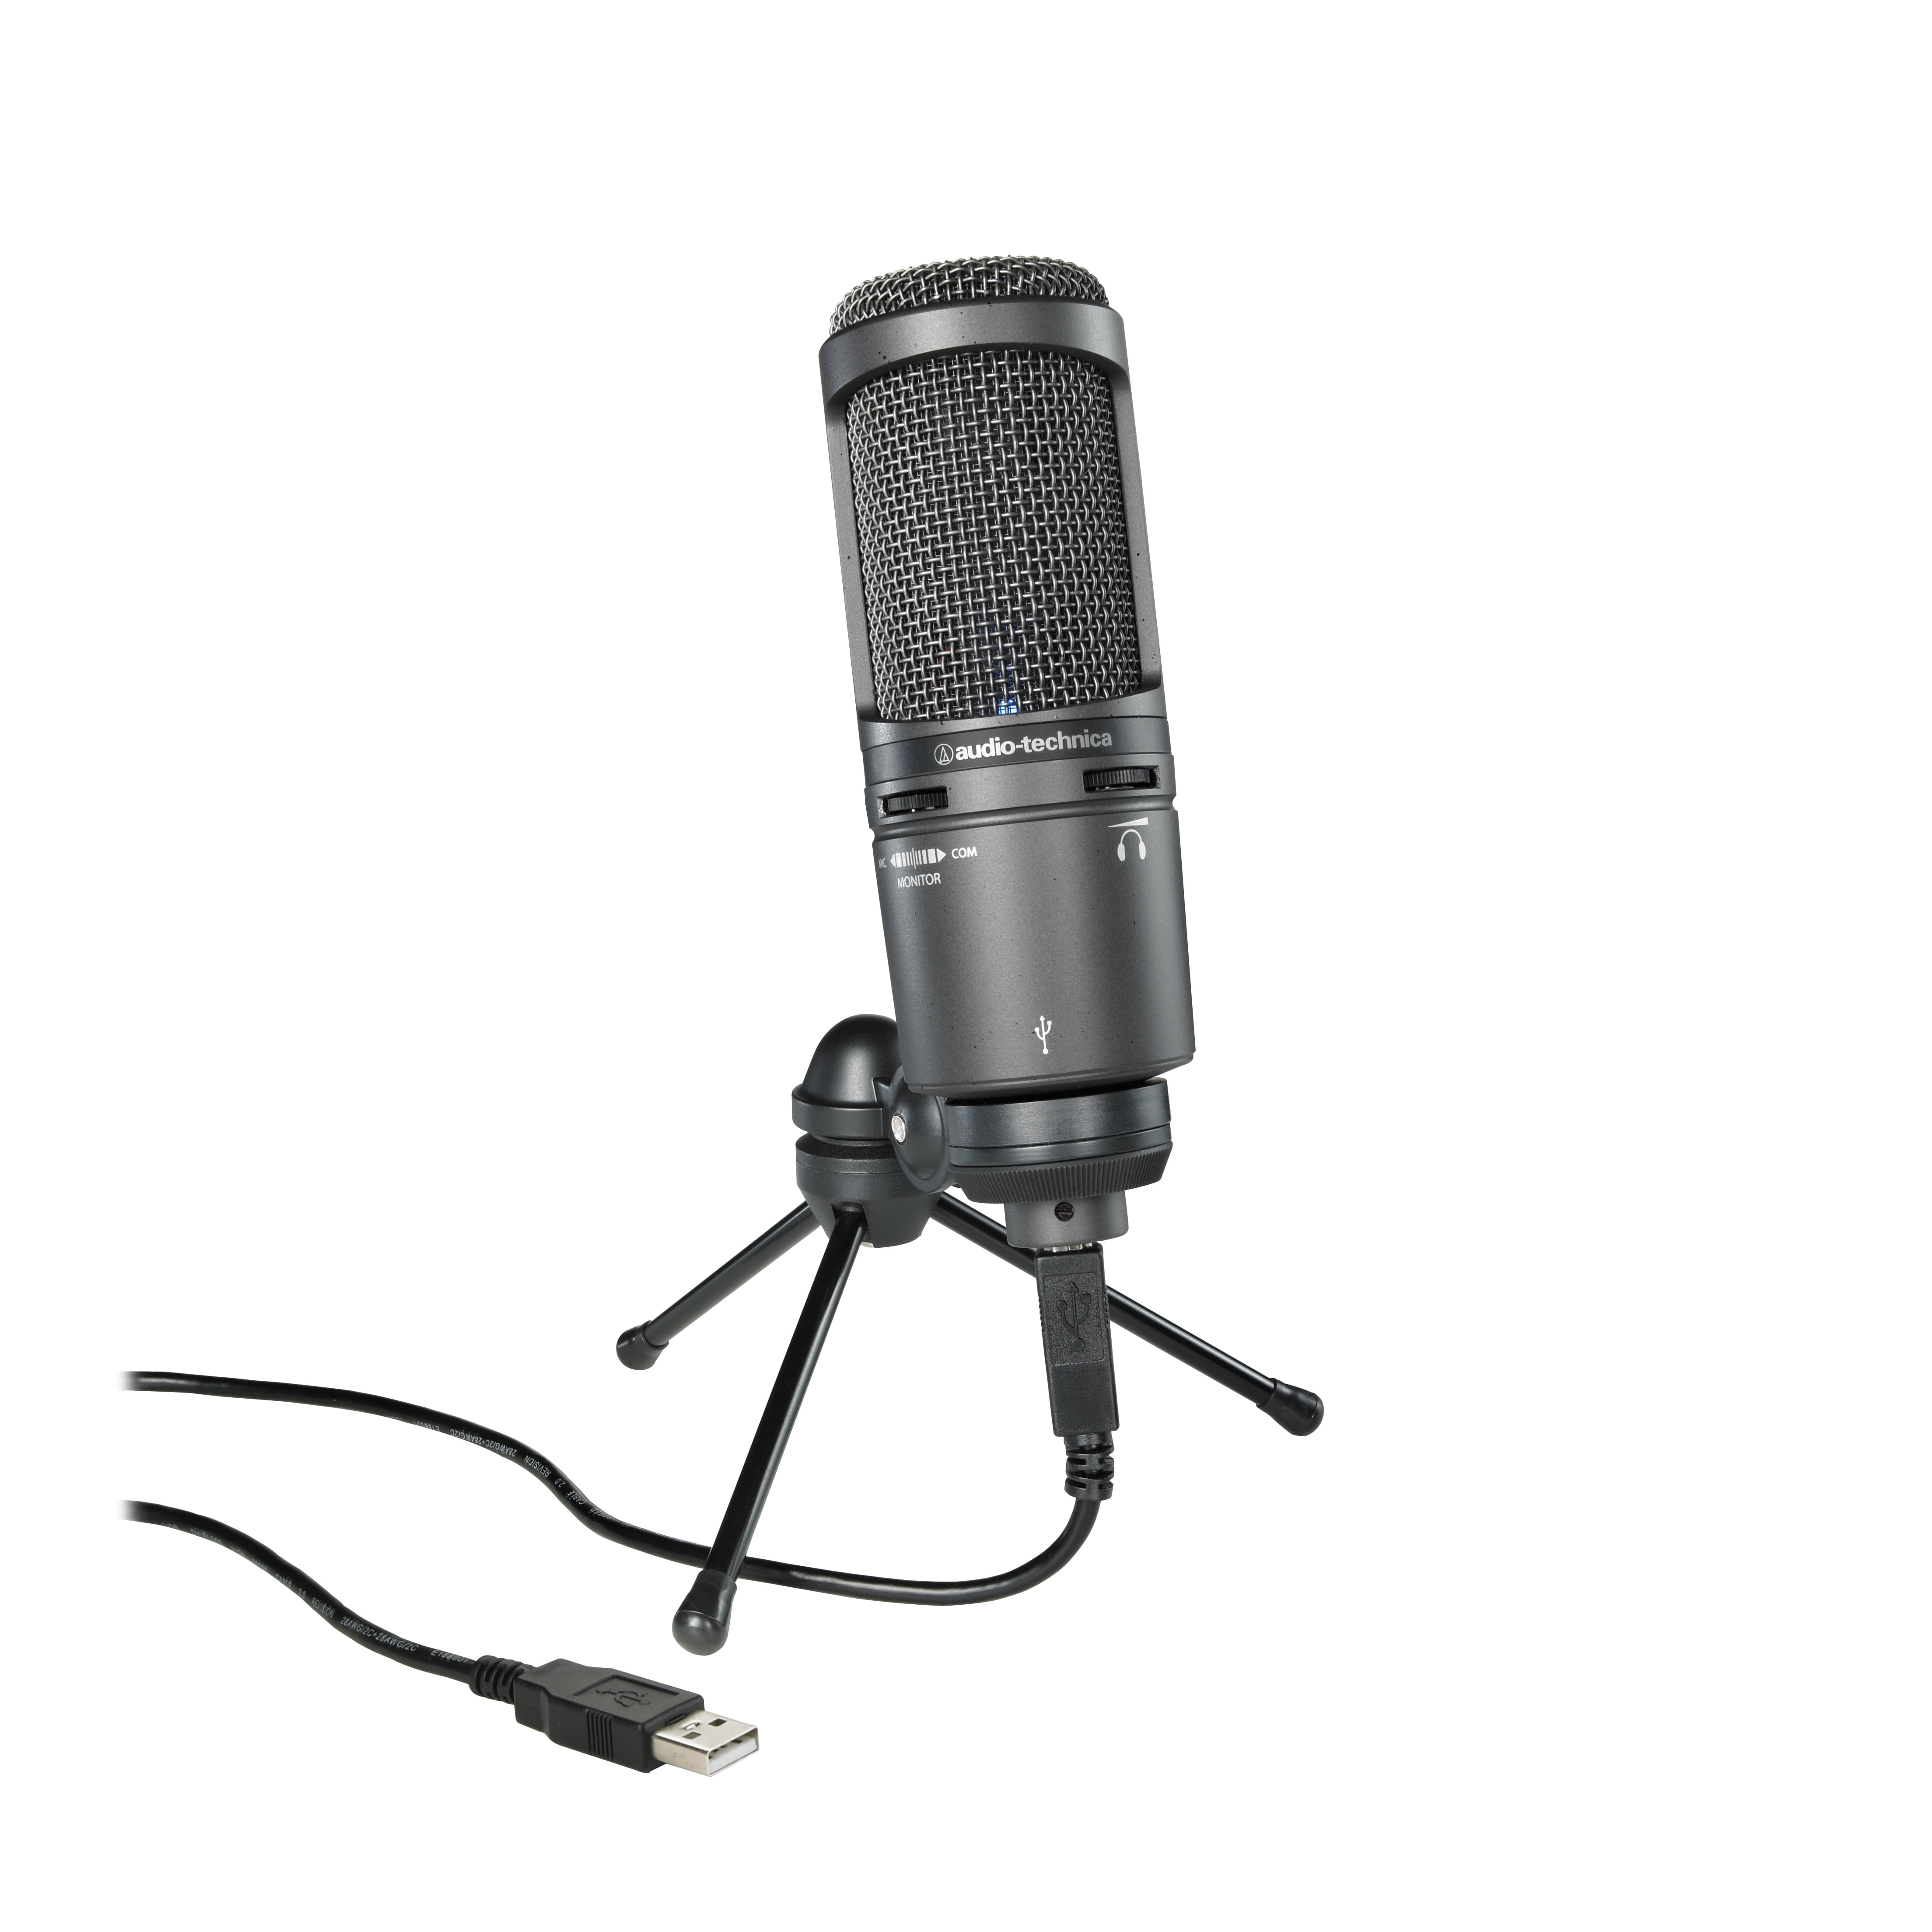 How to Setup Your AT2020 USB Microphone for Live Streaming 